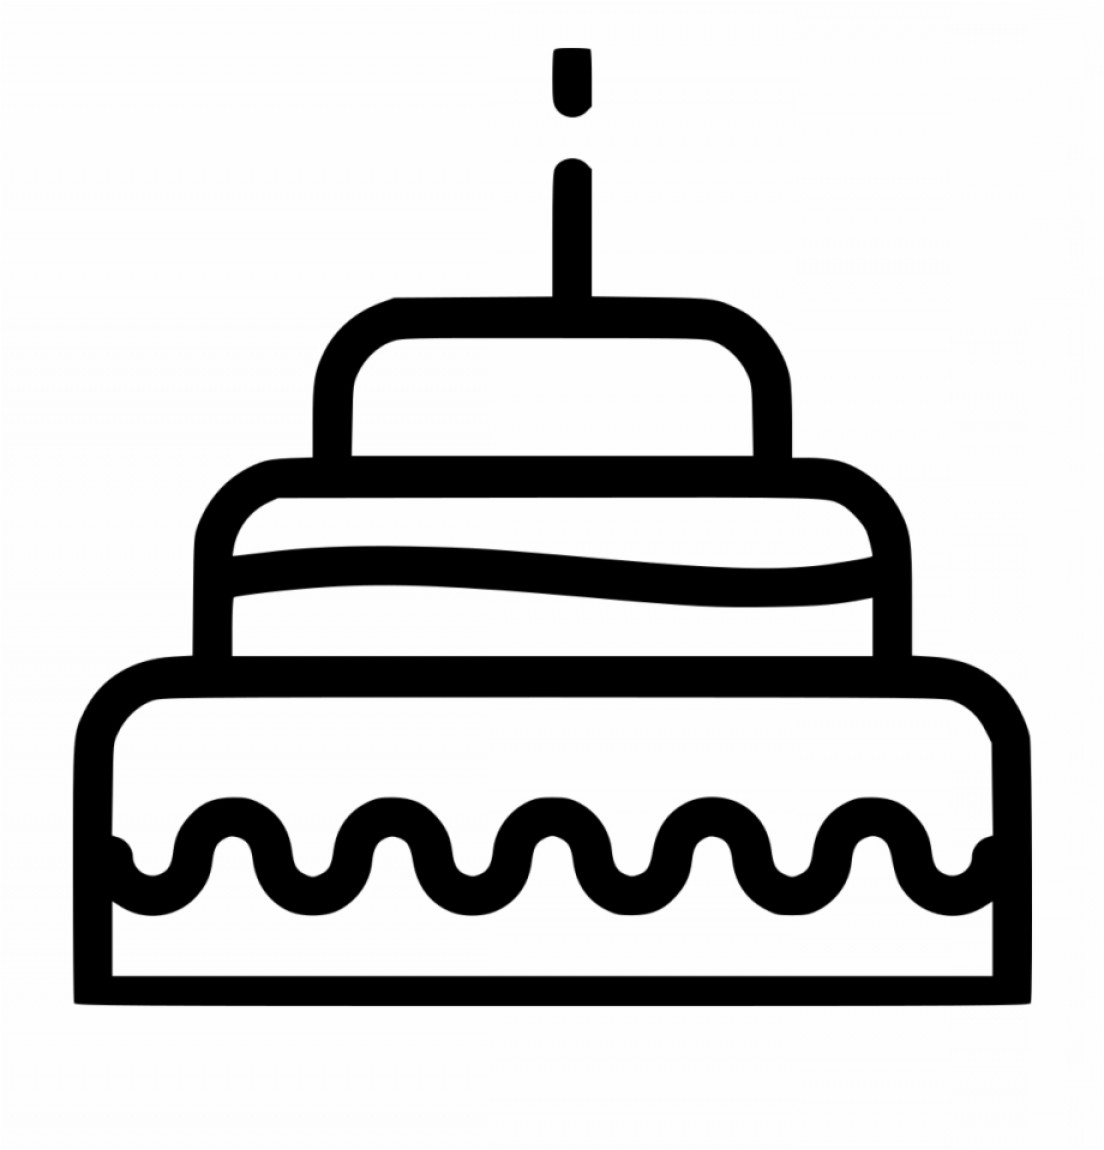 Download Cake Silhouette Vector at Vectorified.com | Collection of ...